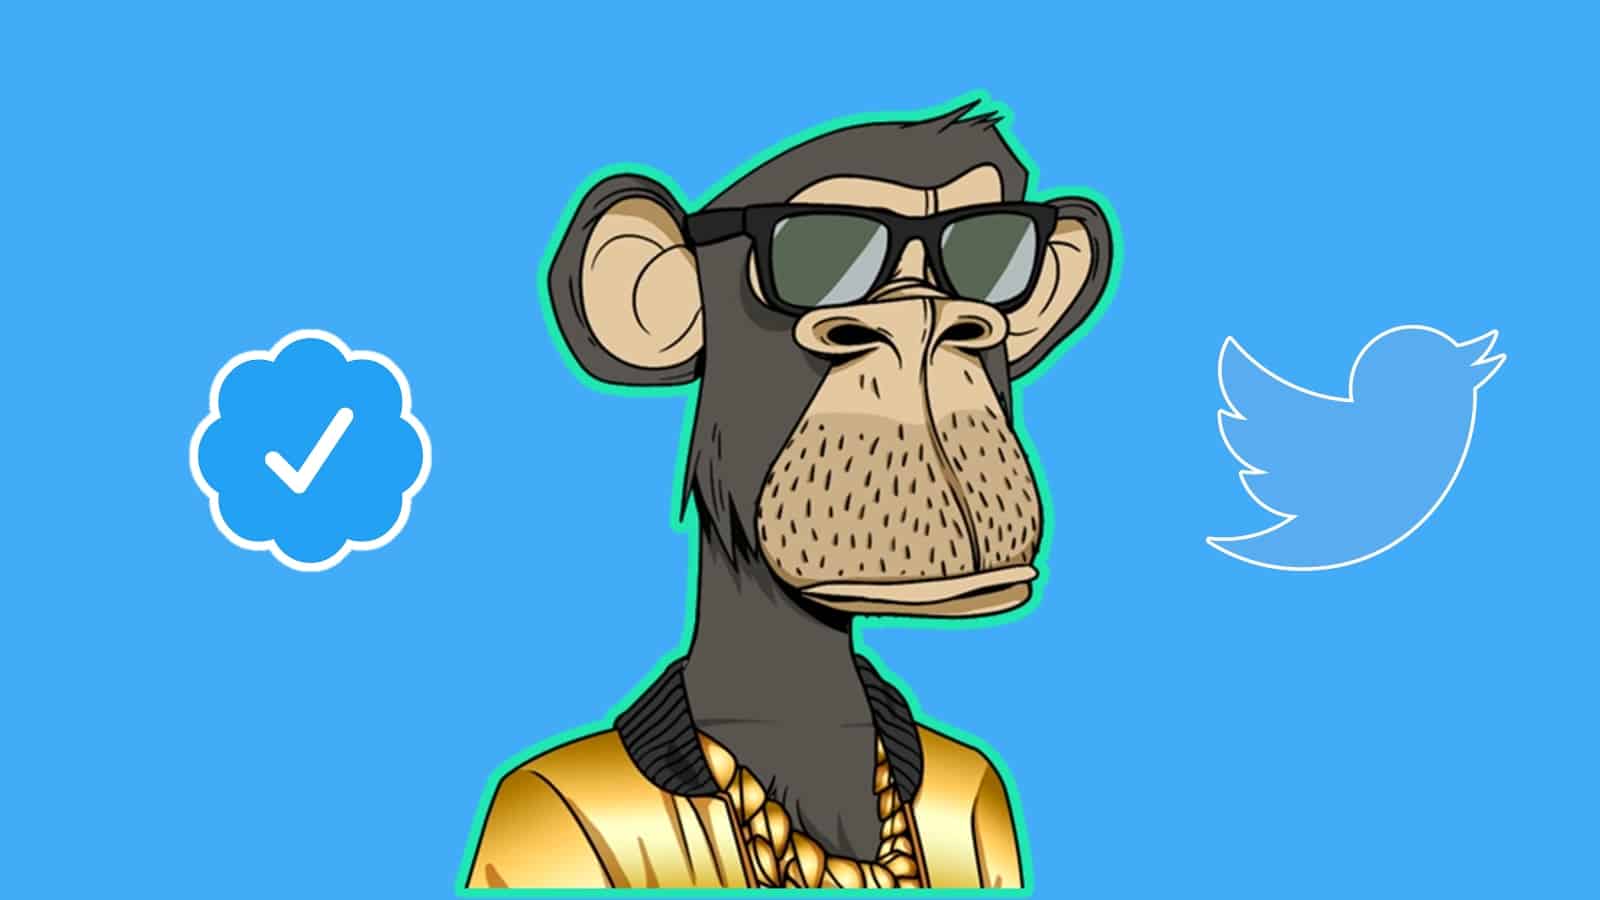 bored ape on blue background with Twitter logo